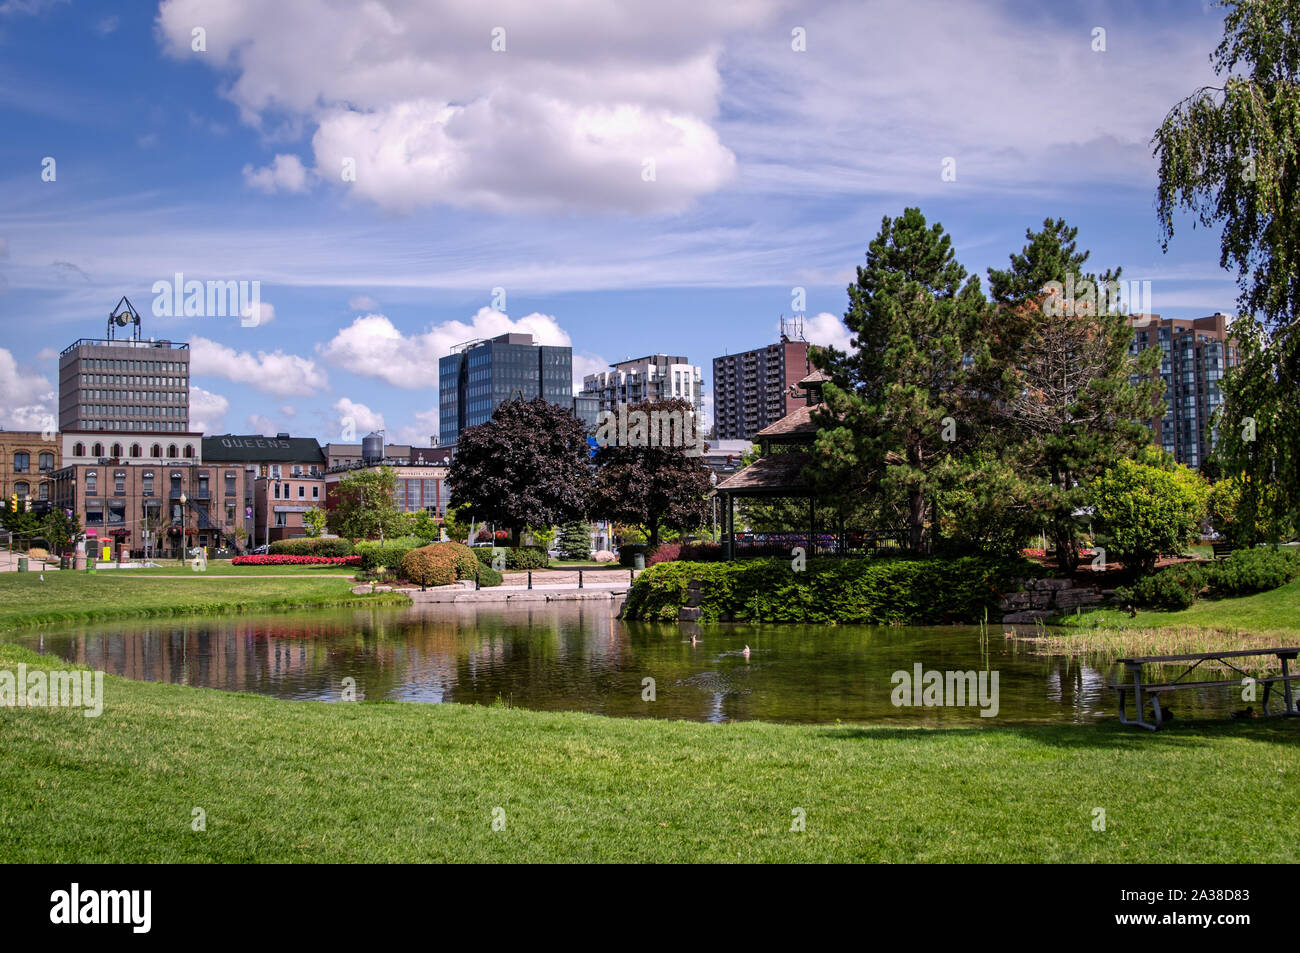 Barrie, Ontario, Canada - 2019 08 25: Summer view on the pond in the Heritage Park in Downtown Barrie, Ontario, Canada Stock Photo